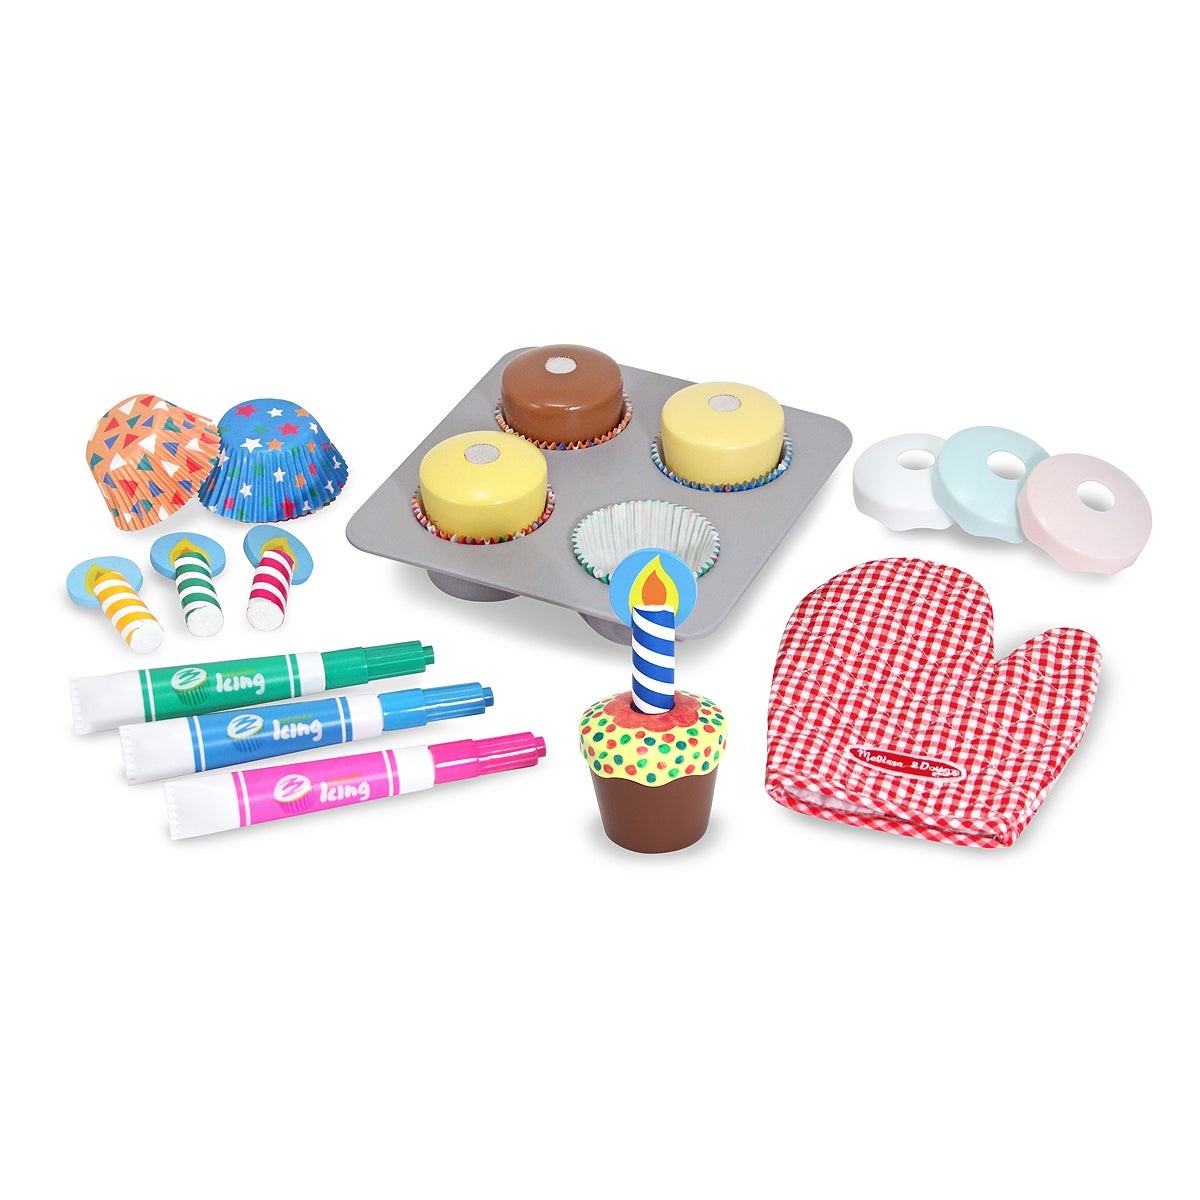 Bake and Decorate Cupcake Set Ages 3+Years